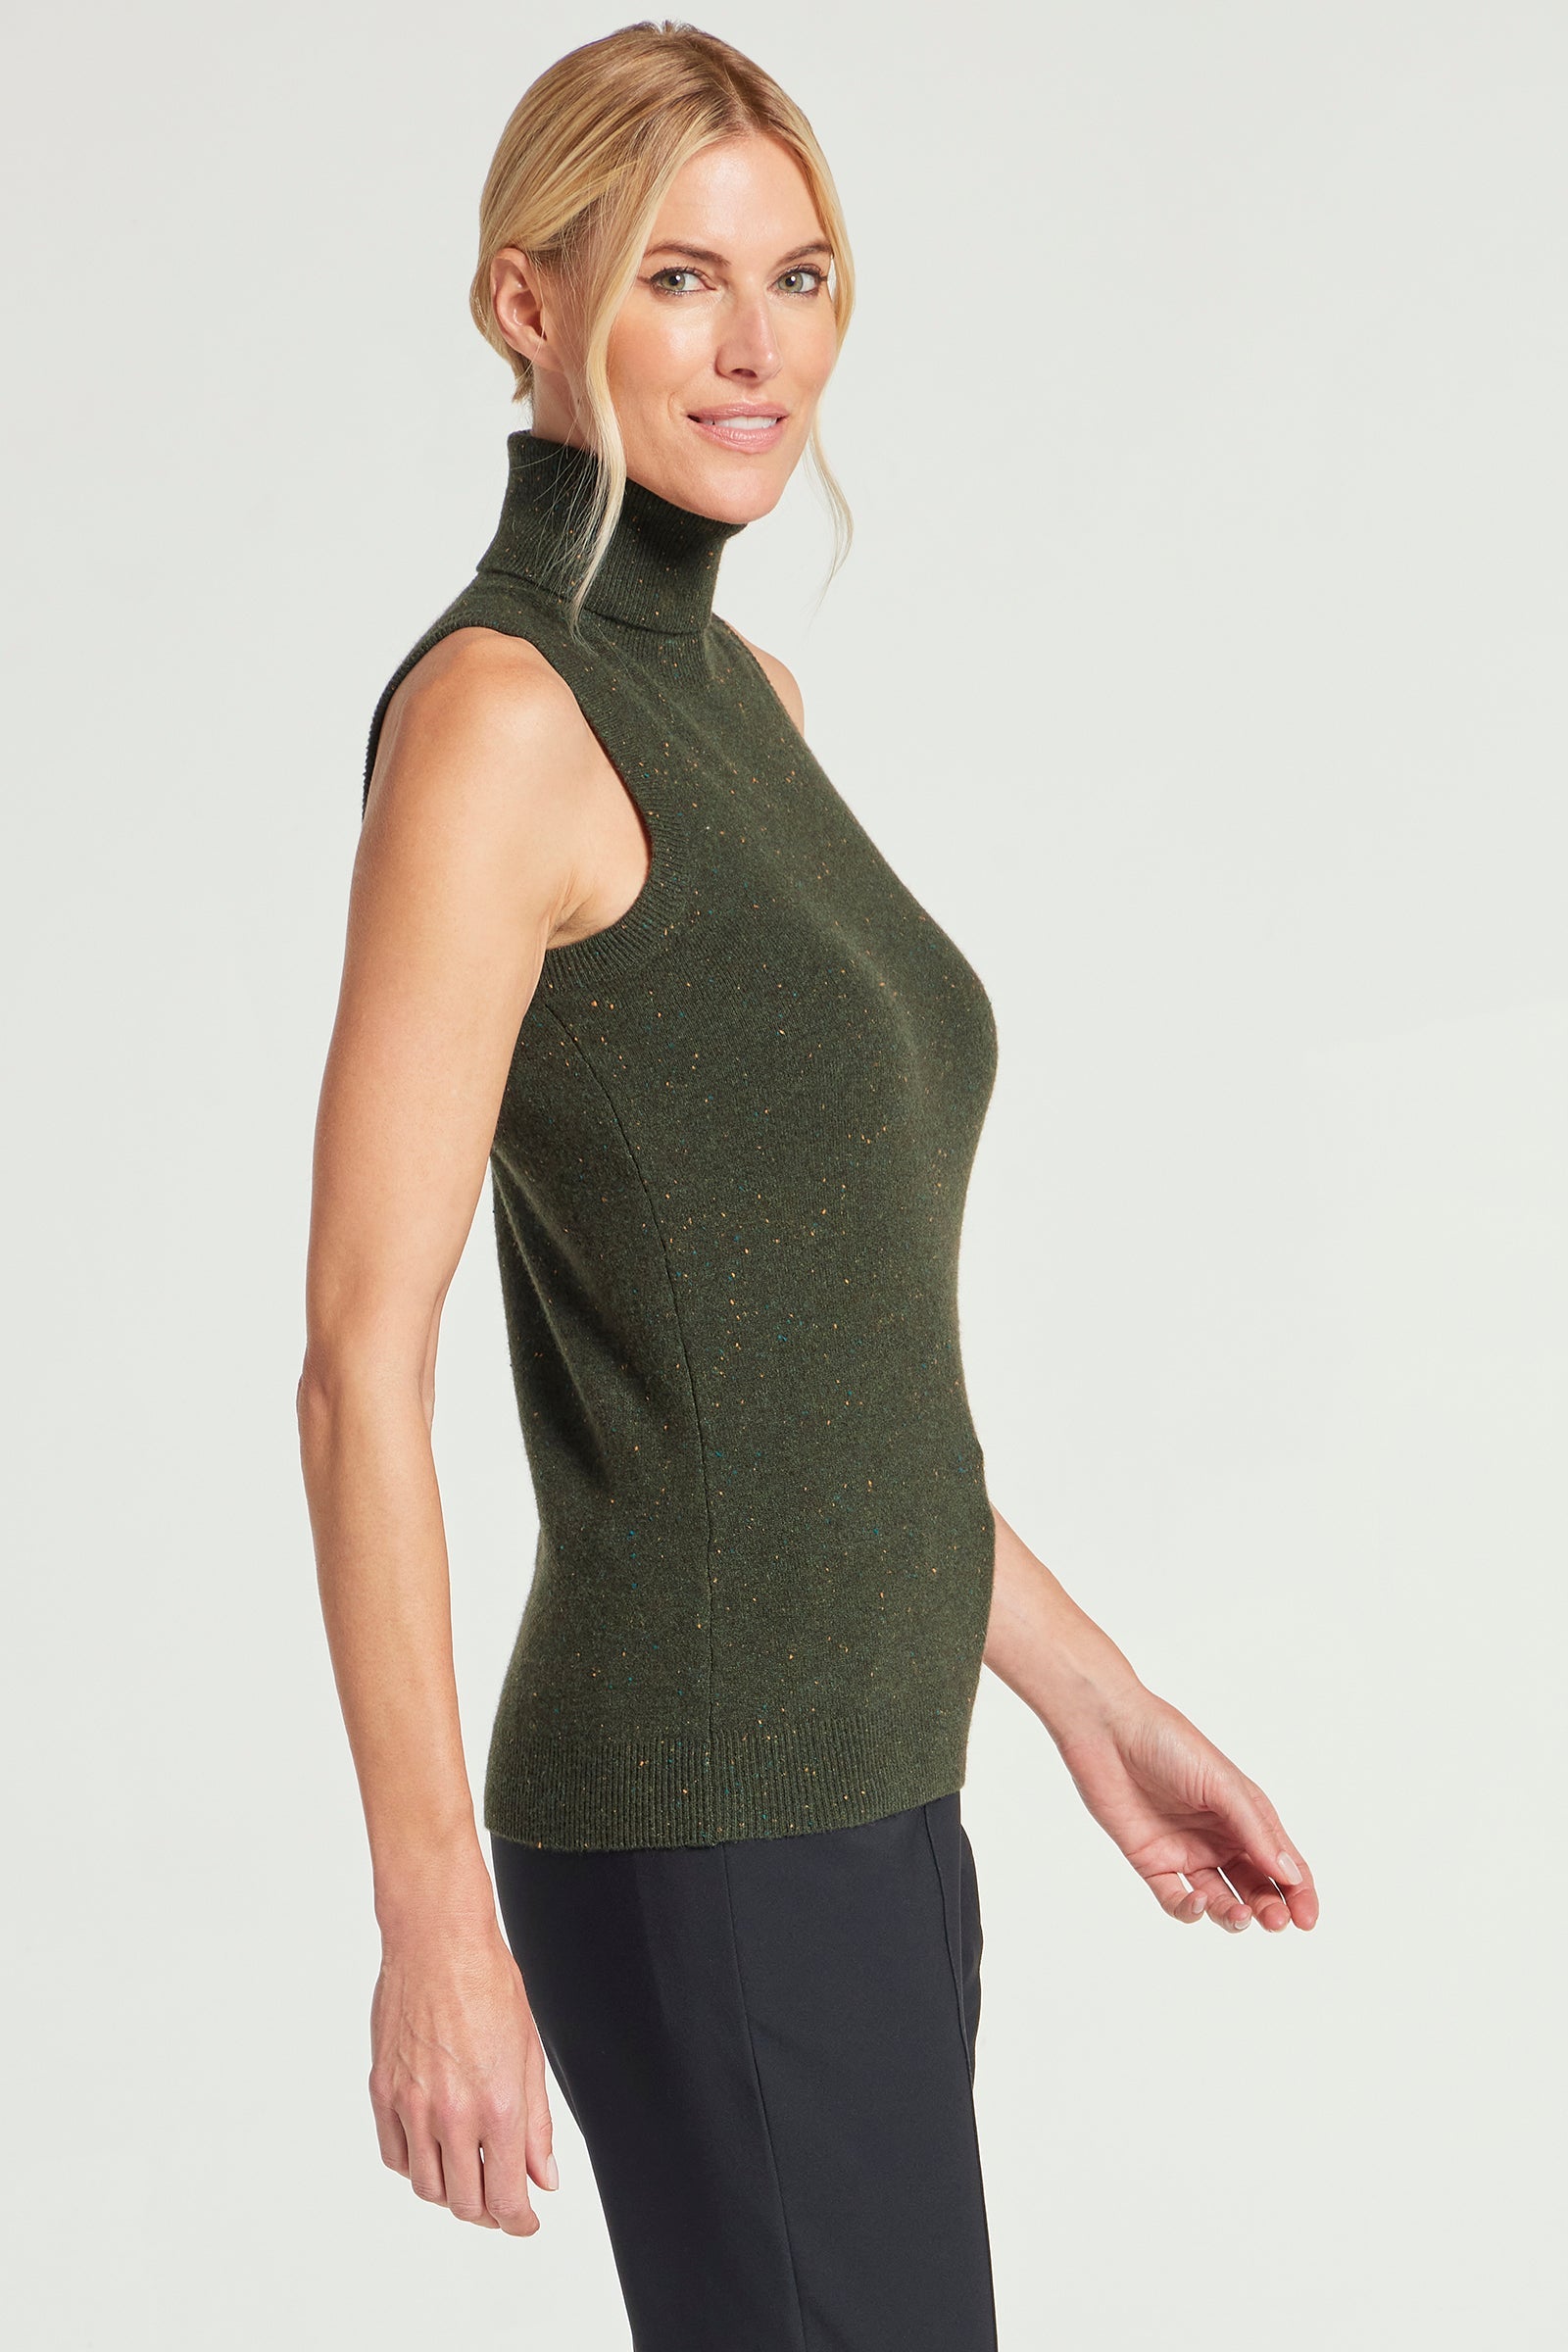 ARMY GREEN || Nicolette Cashmere Mock Neck Sleeveless Top